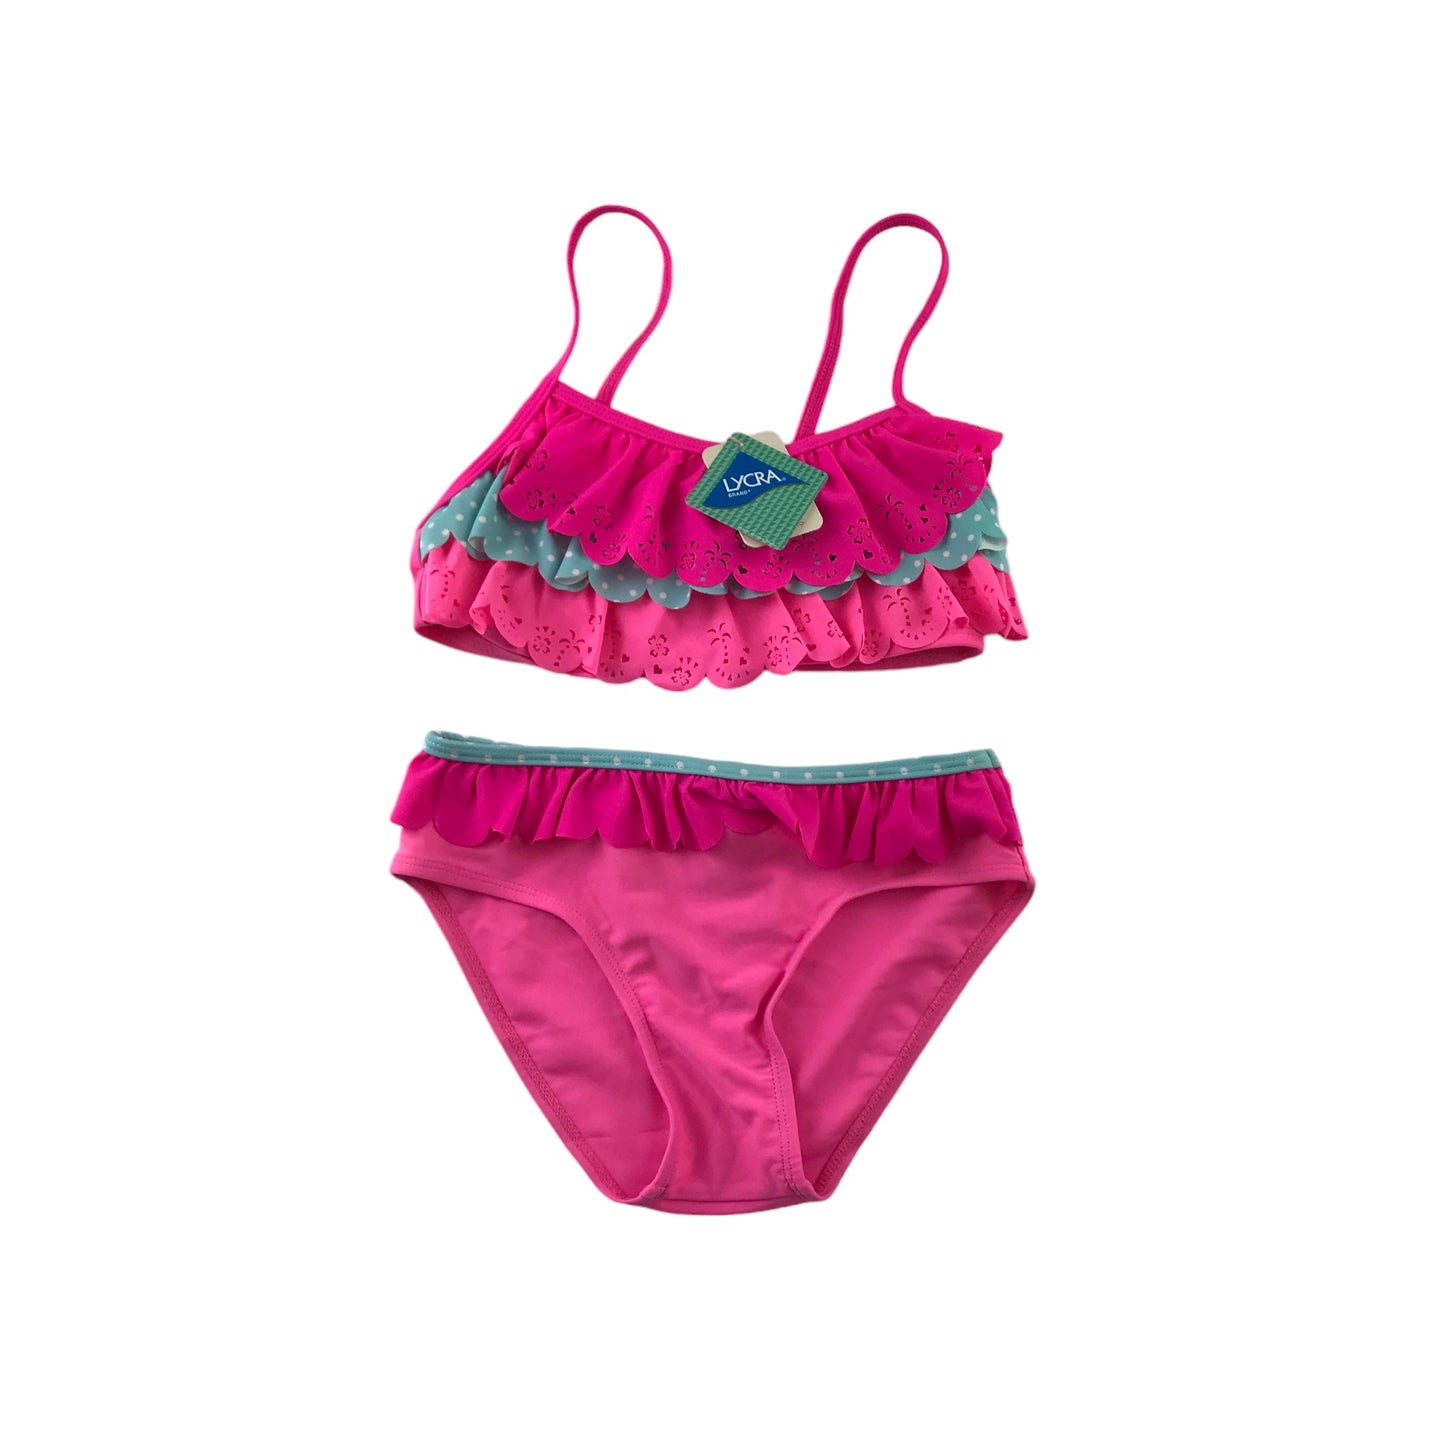 Accessorize Bikini Age 9 Pink and Blue Frilled Detail 2-Piece Set